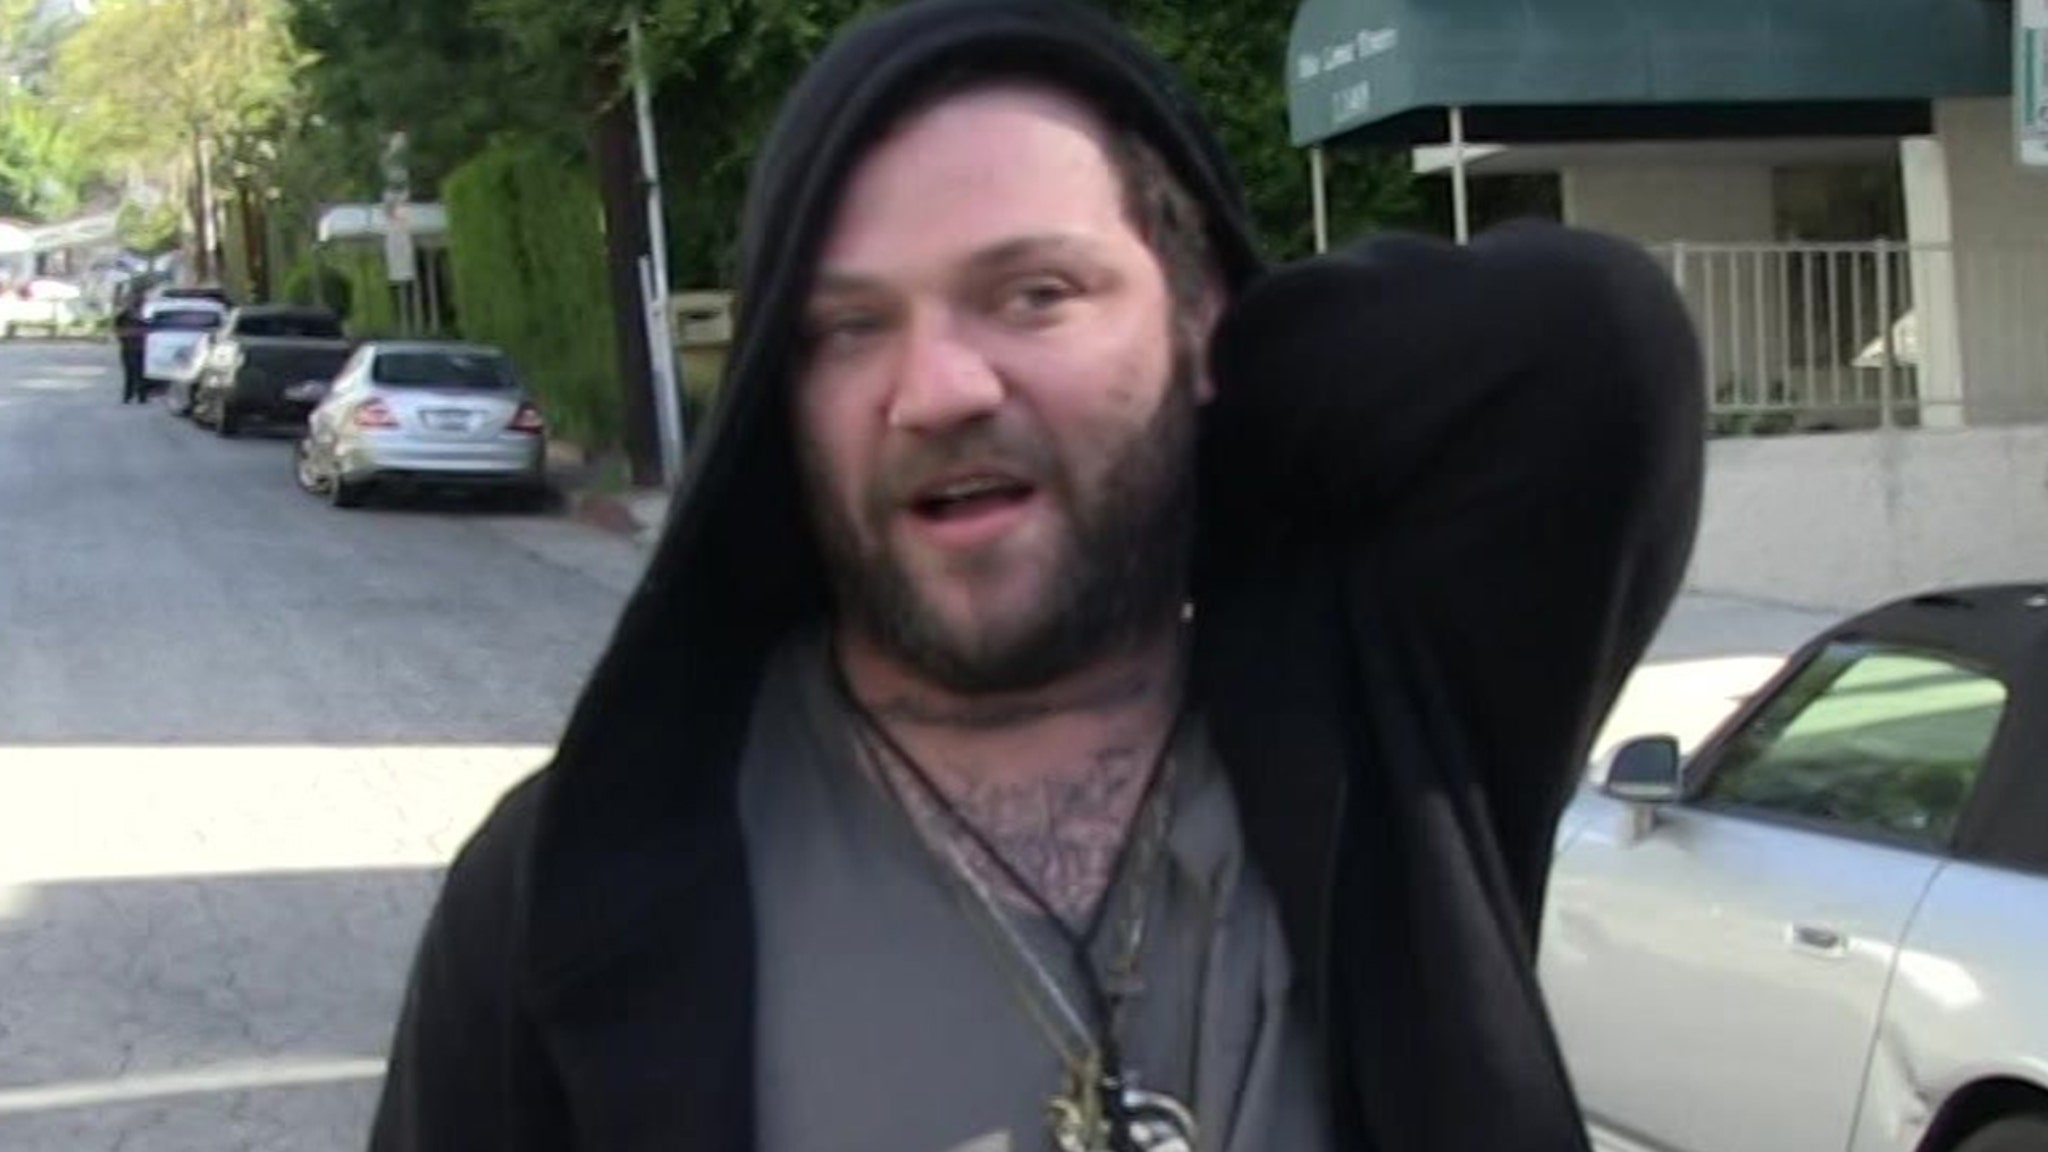 Bam Margera arrested for domestic violence  by accused of kicking a woman